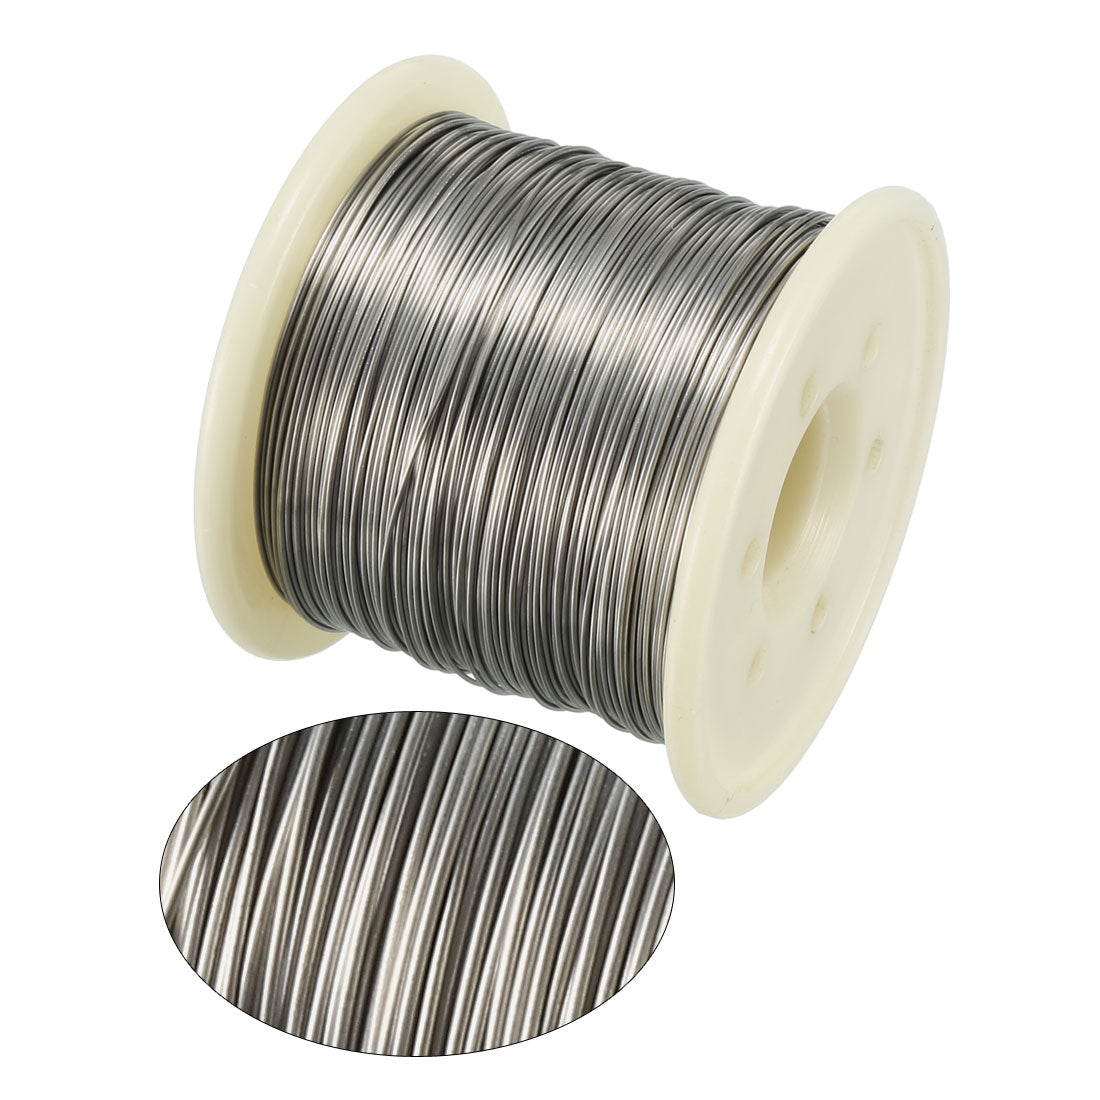 uxcell Uxcell 0.5mm 24AWG Heating Resistor Wire Nichrome Resistance Wires for Heating Elements 164ft